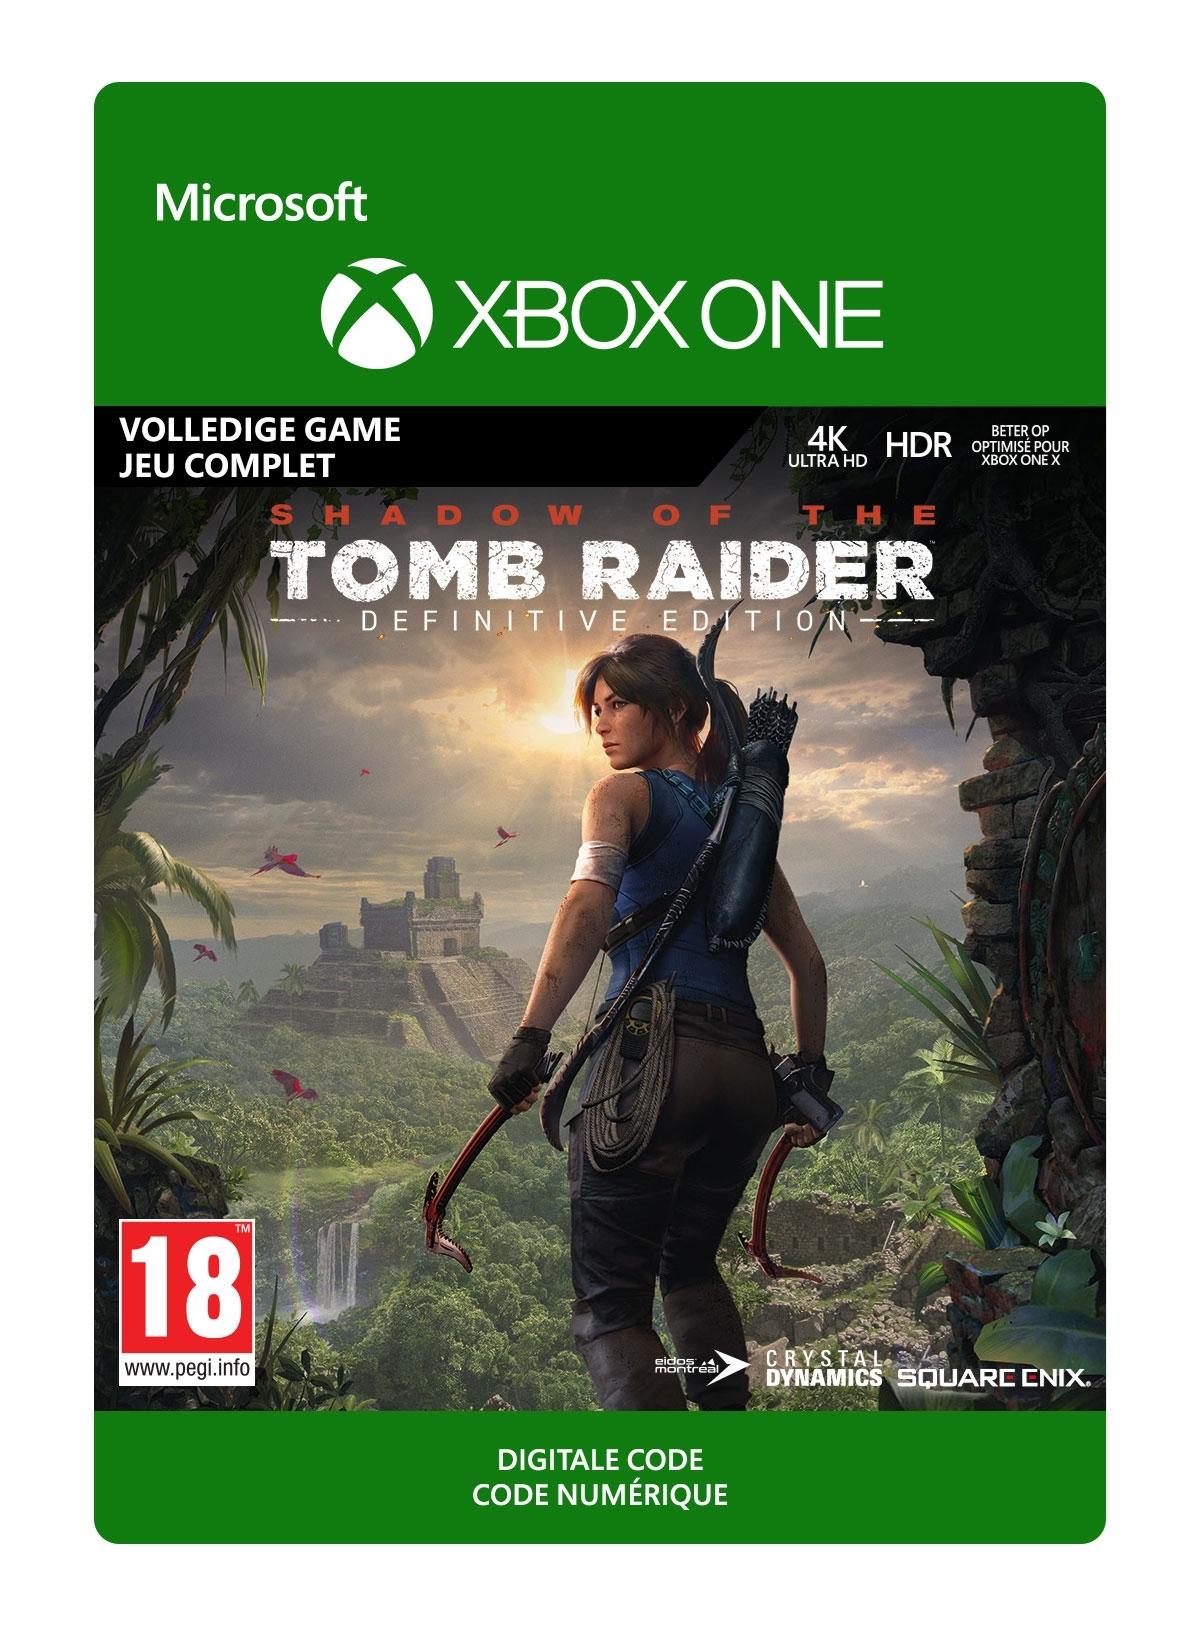 Shadow of the Tomb Raider: Definitive Edition - Xbox One - Game | G3Q-00840 (d6d258bd-7d7d-1e4d-a975-232a4bfcd70f)